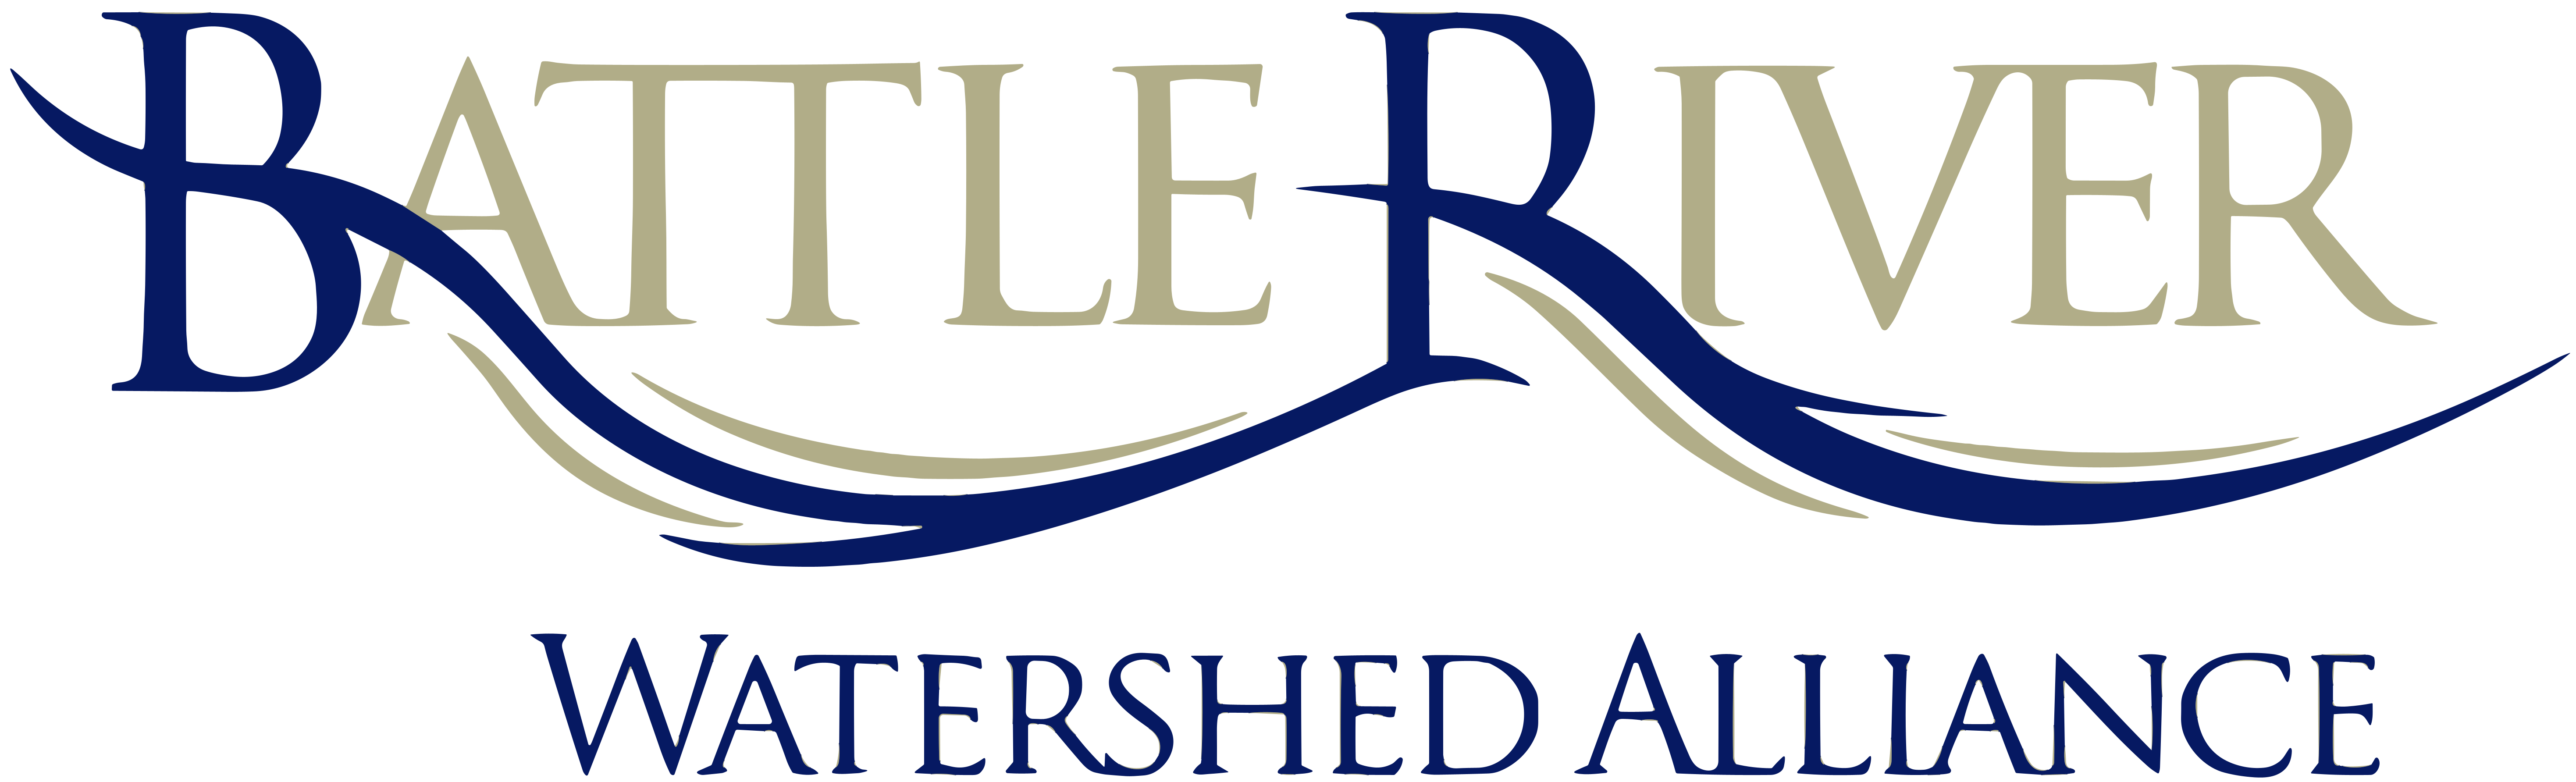 Logo for Battle River Watershed Alliance Society on a transparent background